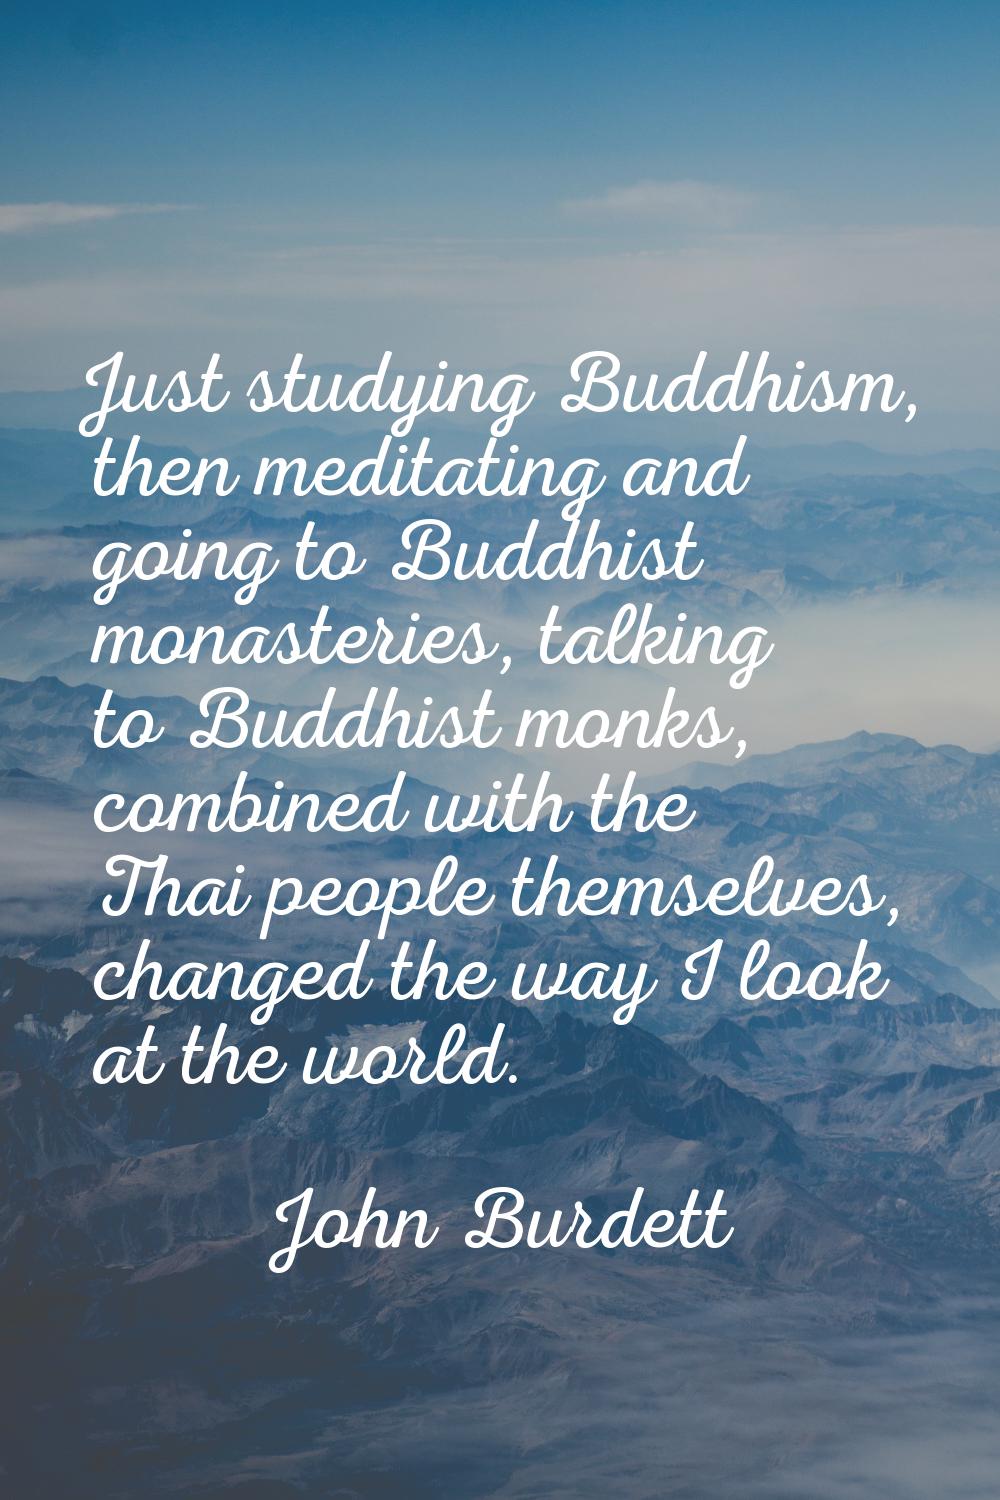 Just studying Buddhism, then meditating and going to Buddhist monasteries, talking to Buddhist monk